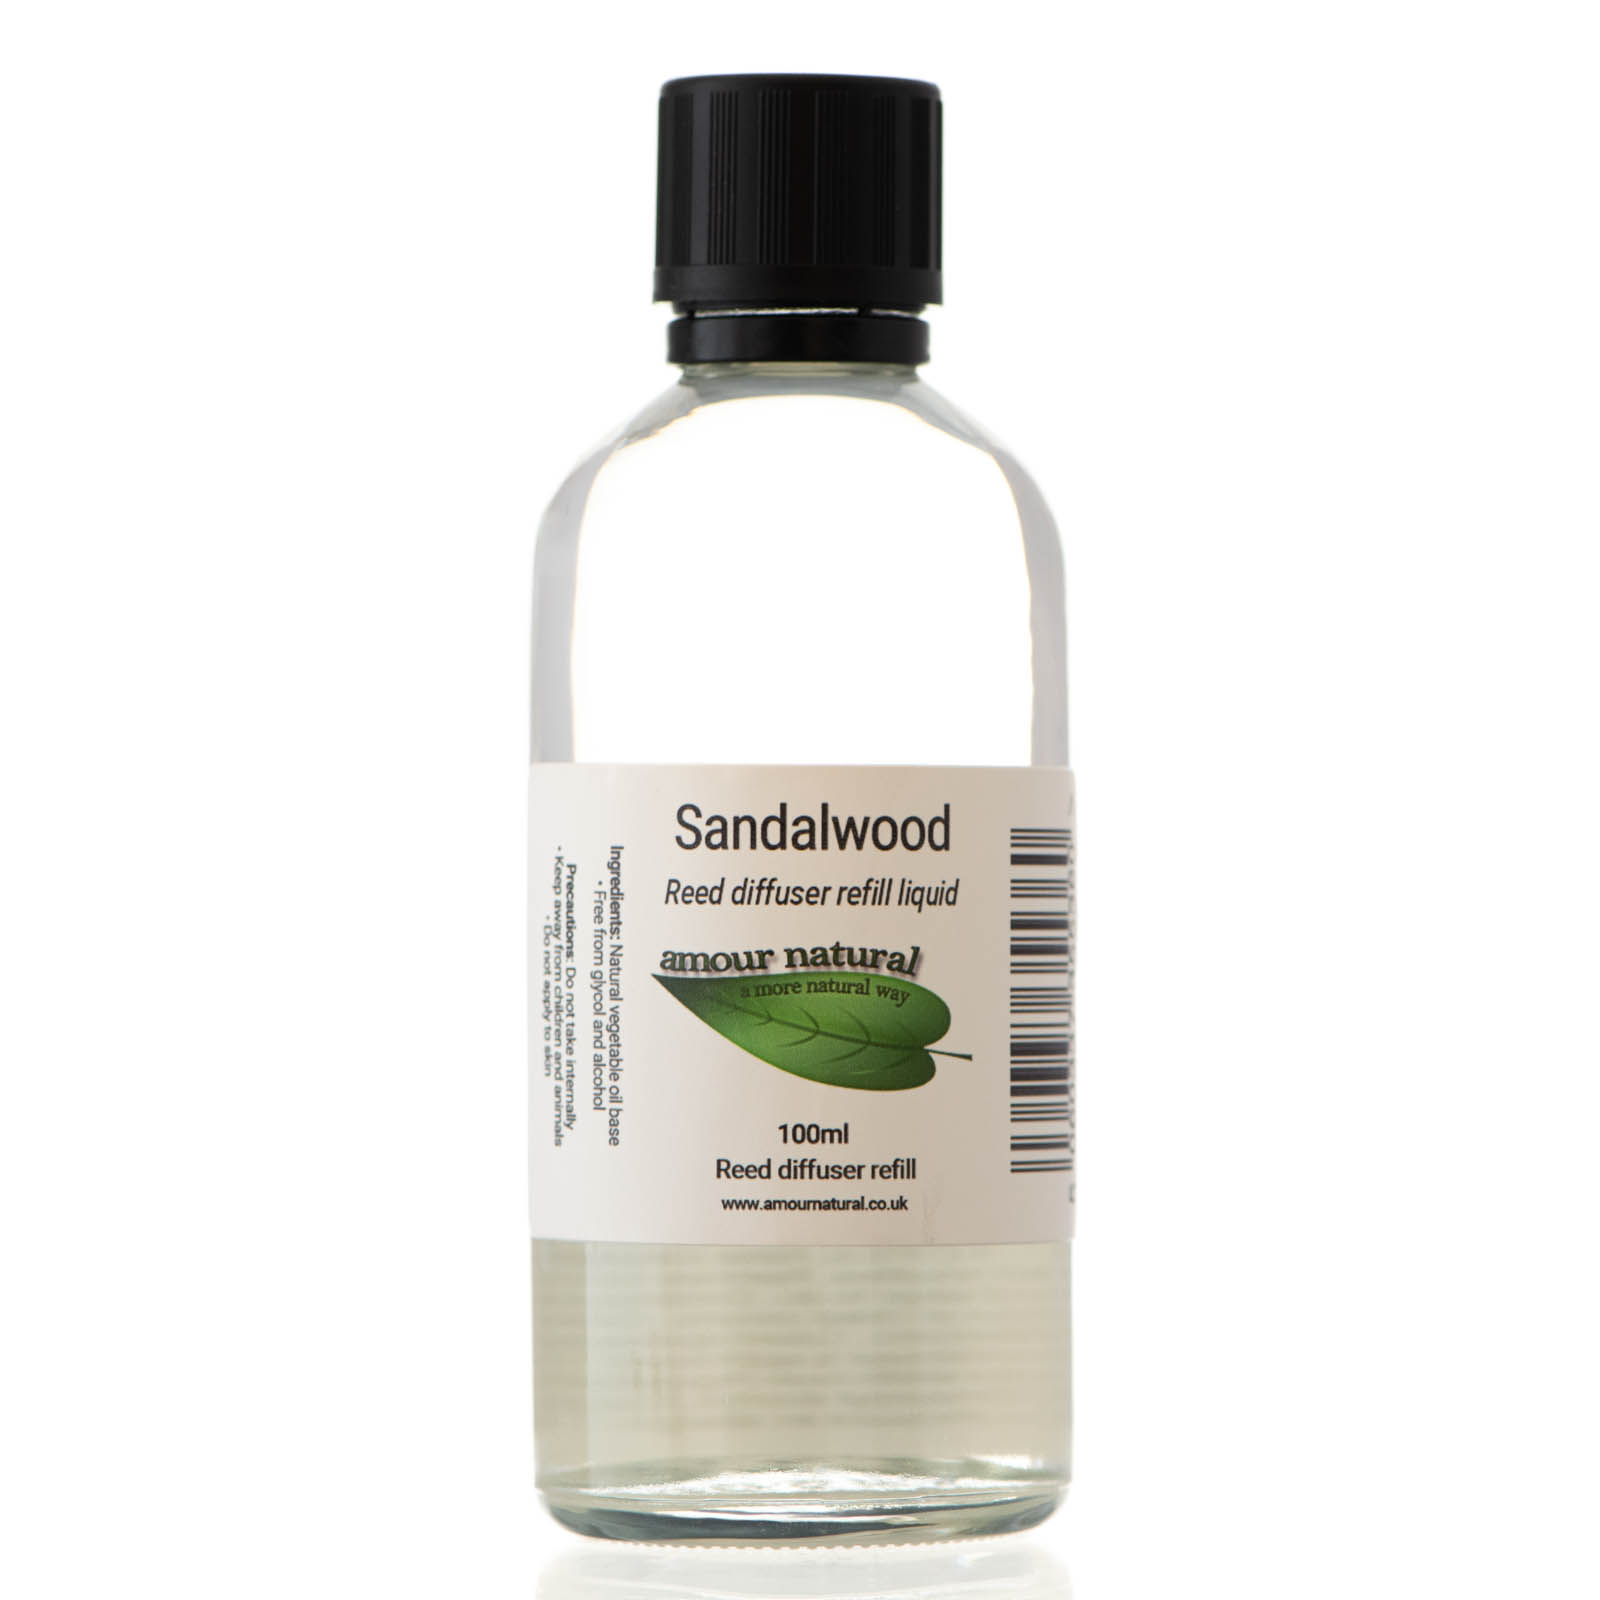 Sandalwood reed diffuser refill (bottle only)